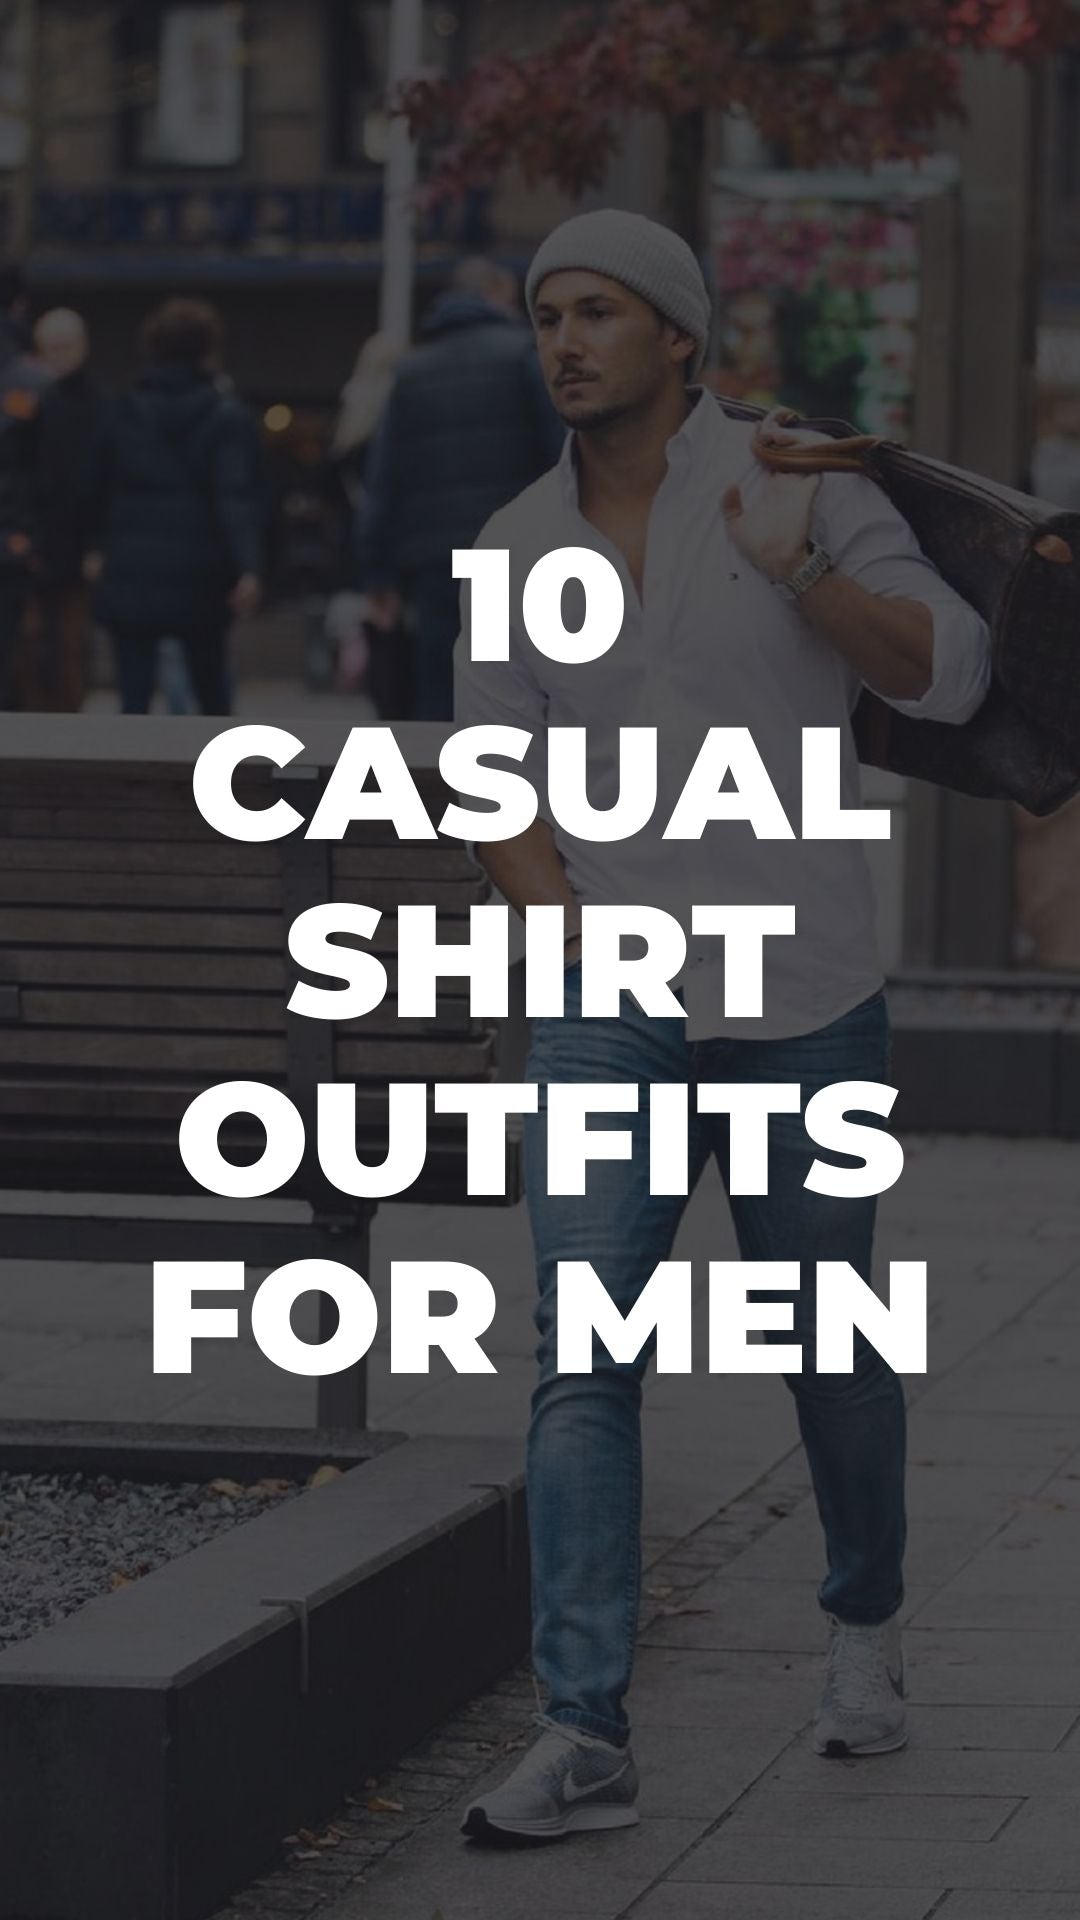 Casual shirt outfits for men. How to wear casual shirt - LIFESTYLE BY PS